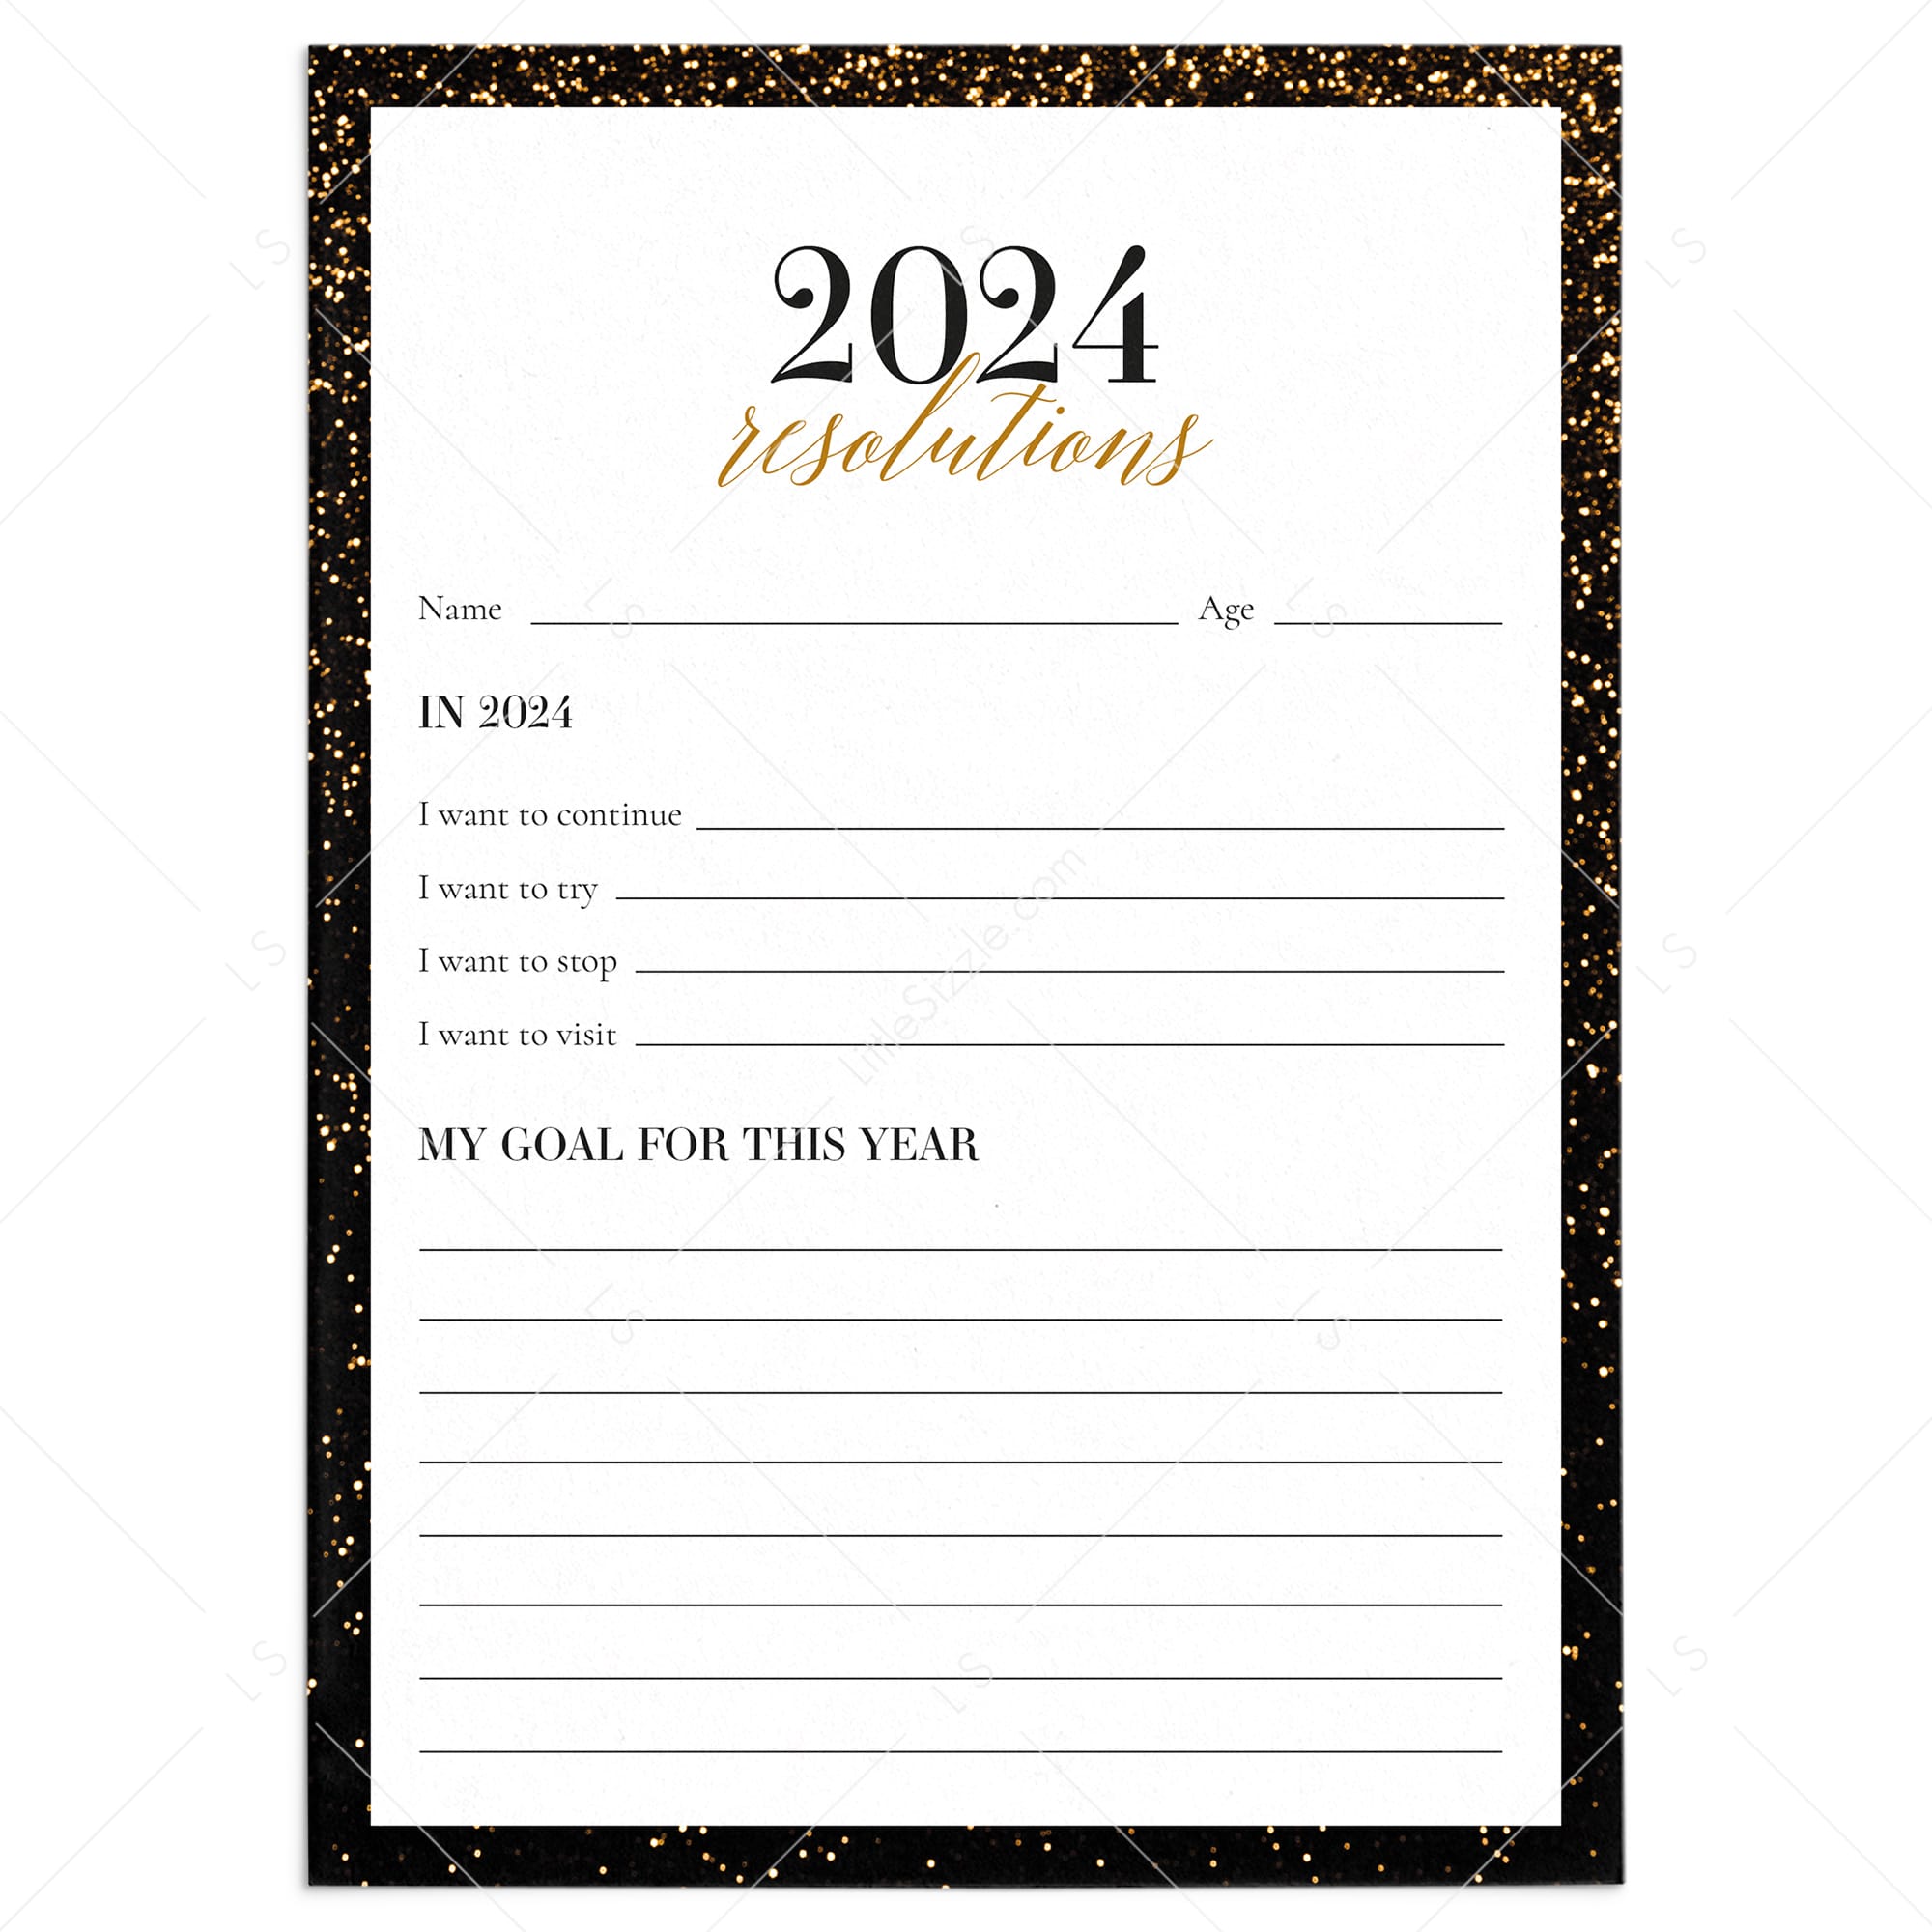 2024-resolutions-and-new-year-s-goals-card-printable-instant-download